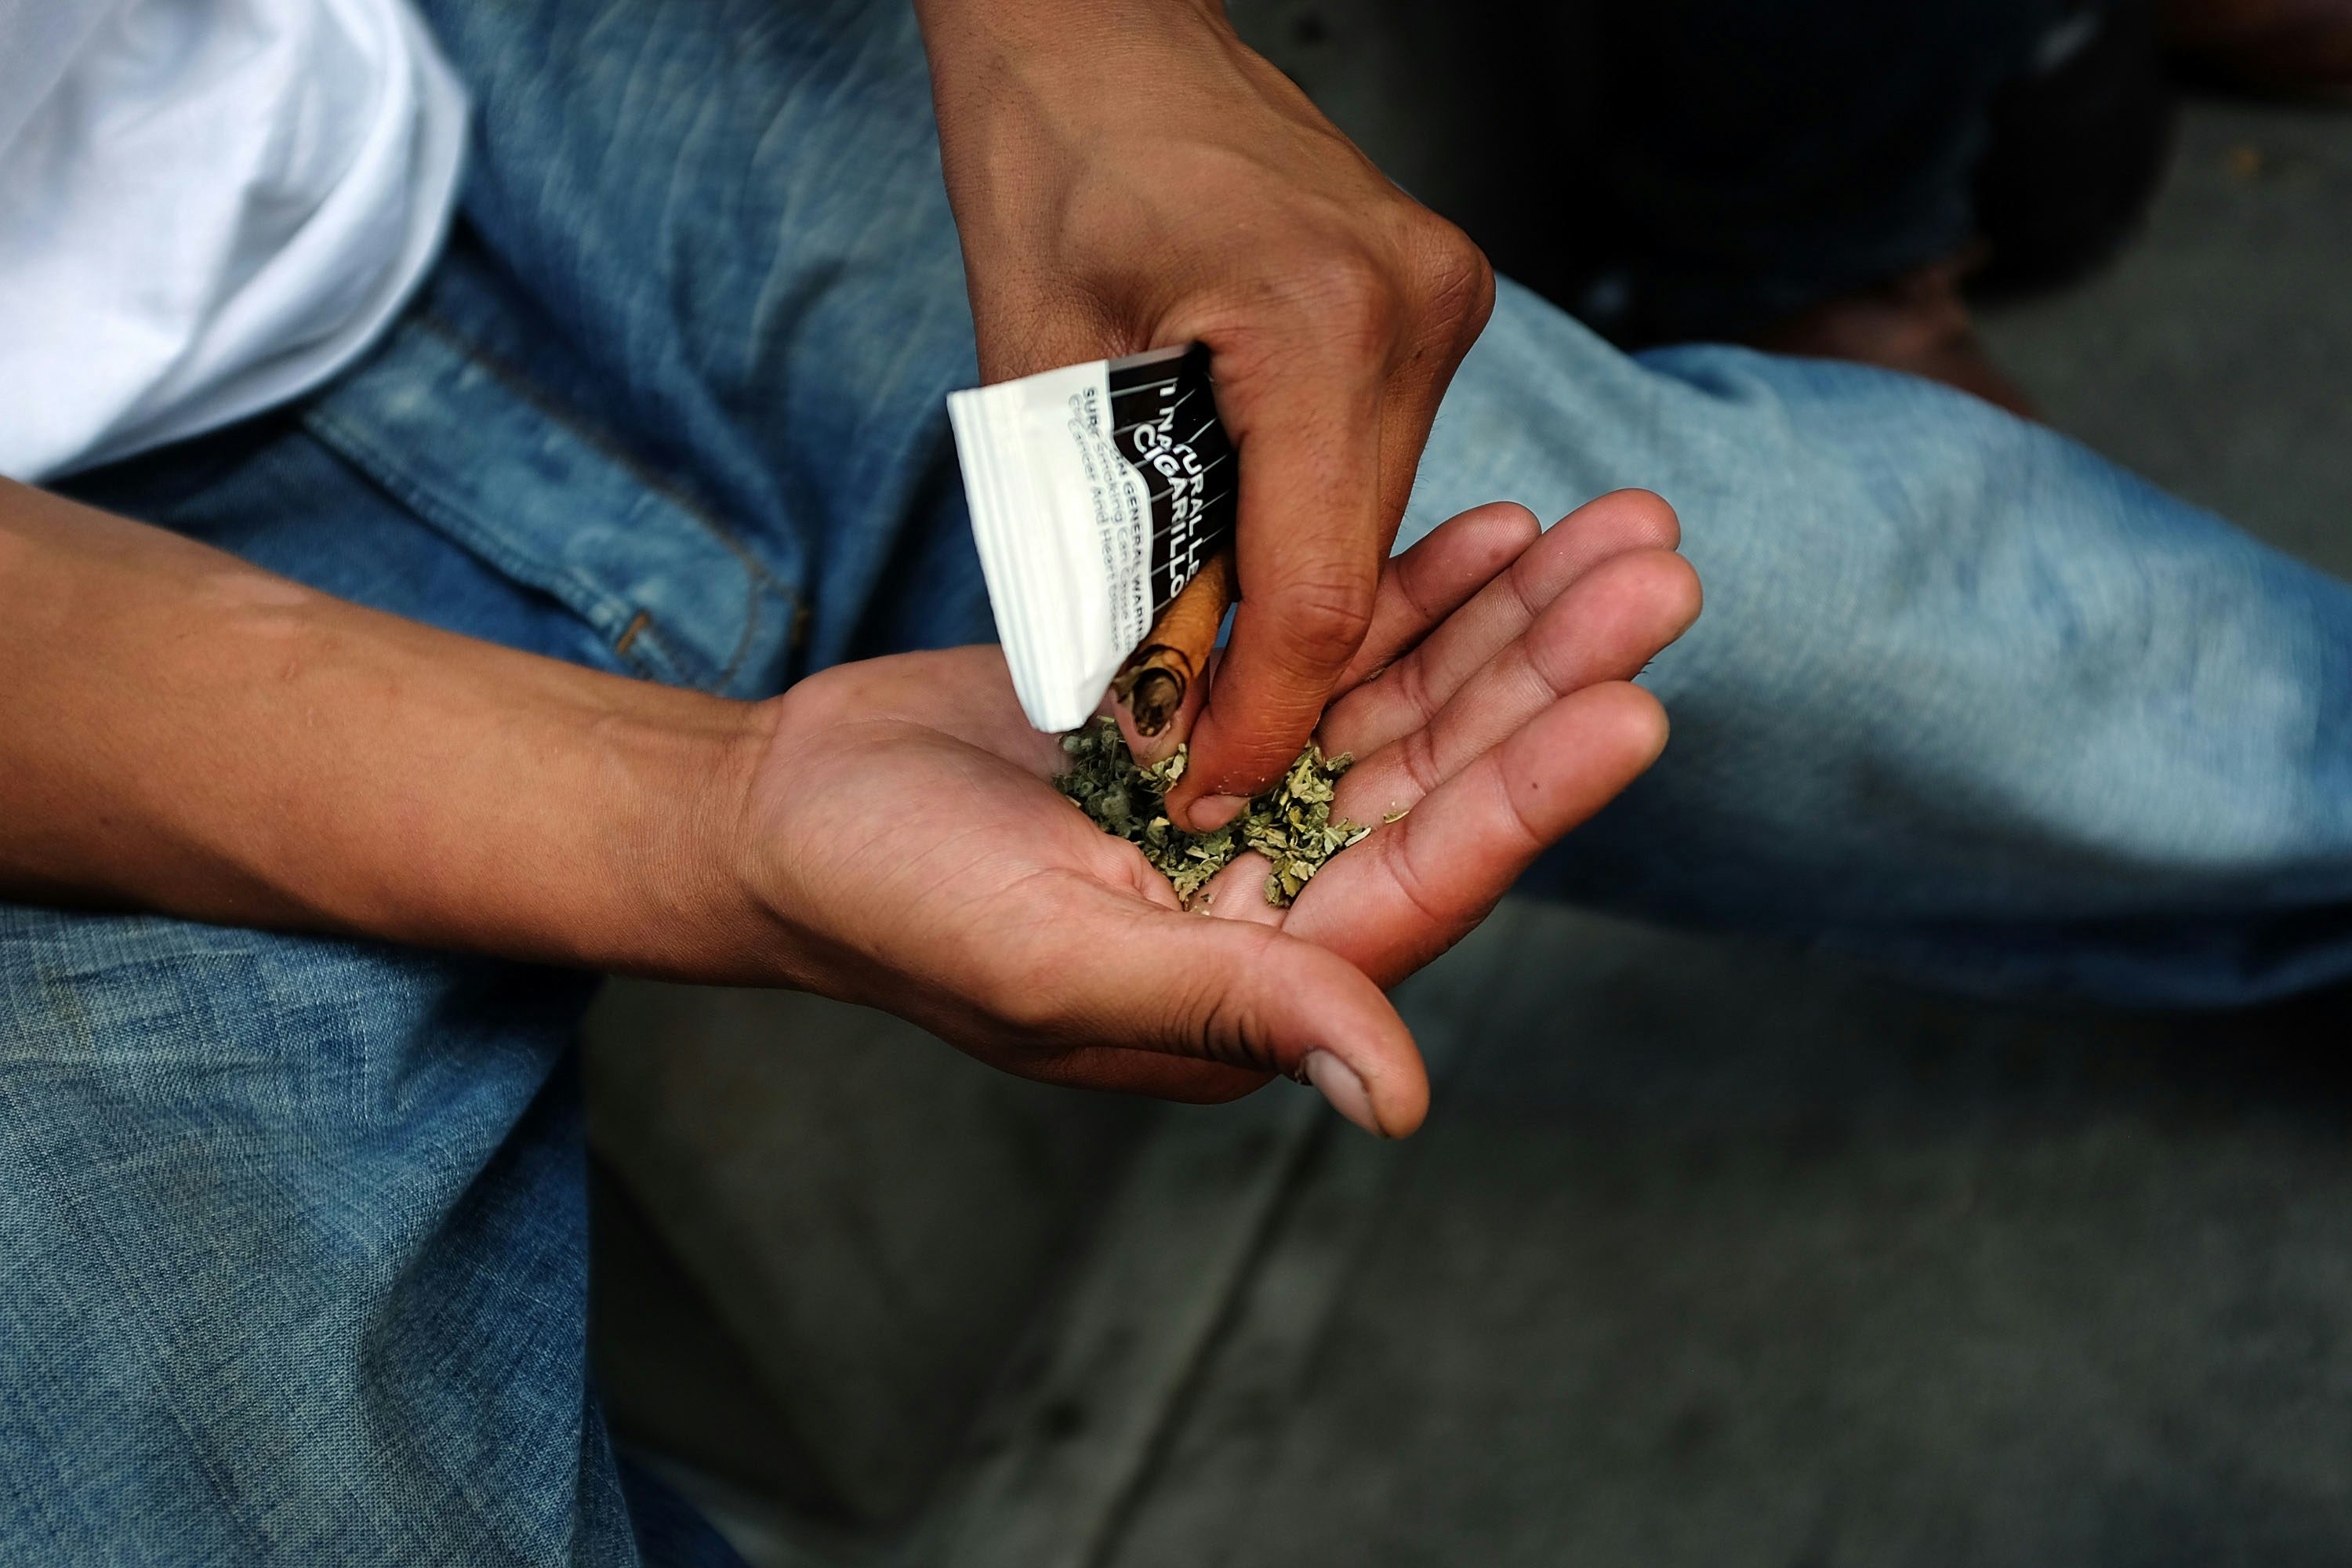 Synthetic pot overdoses k2 spice 1 of 2 Synthetic marijuana overdoses on K2 and Spice are breaking out body bags